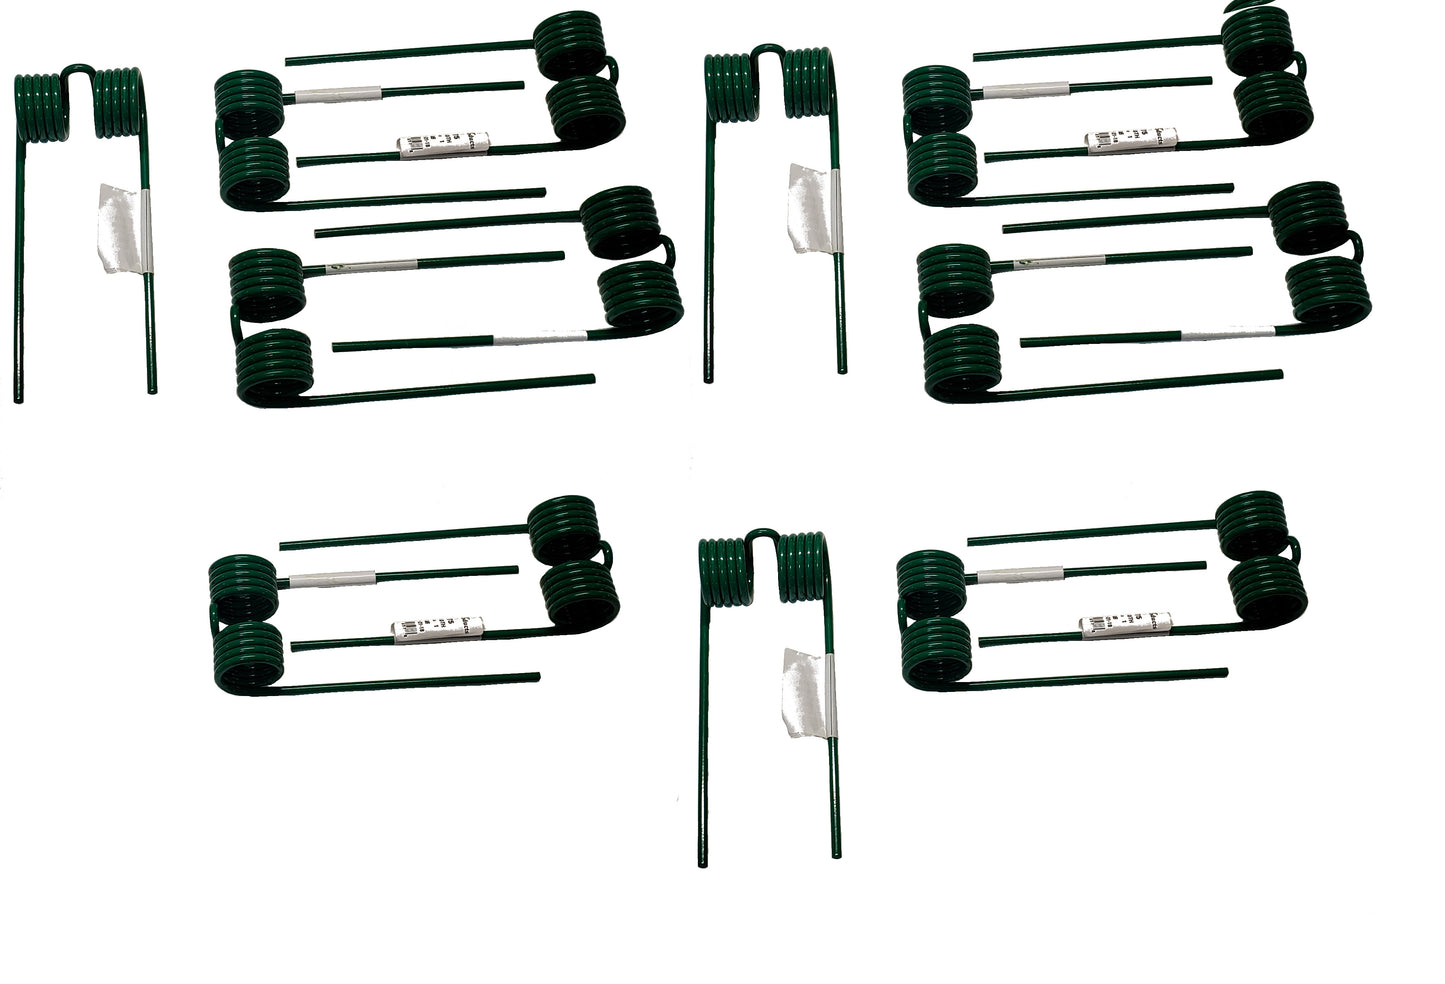 A&I Products Baler Tooth SET OF 15 - A-E79475